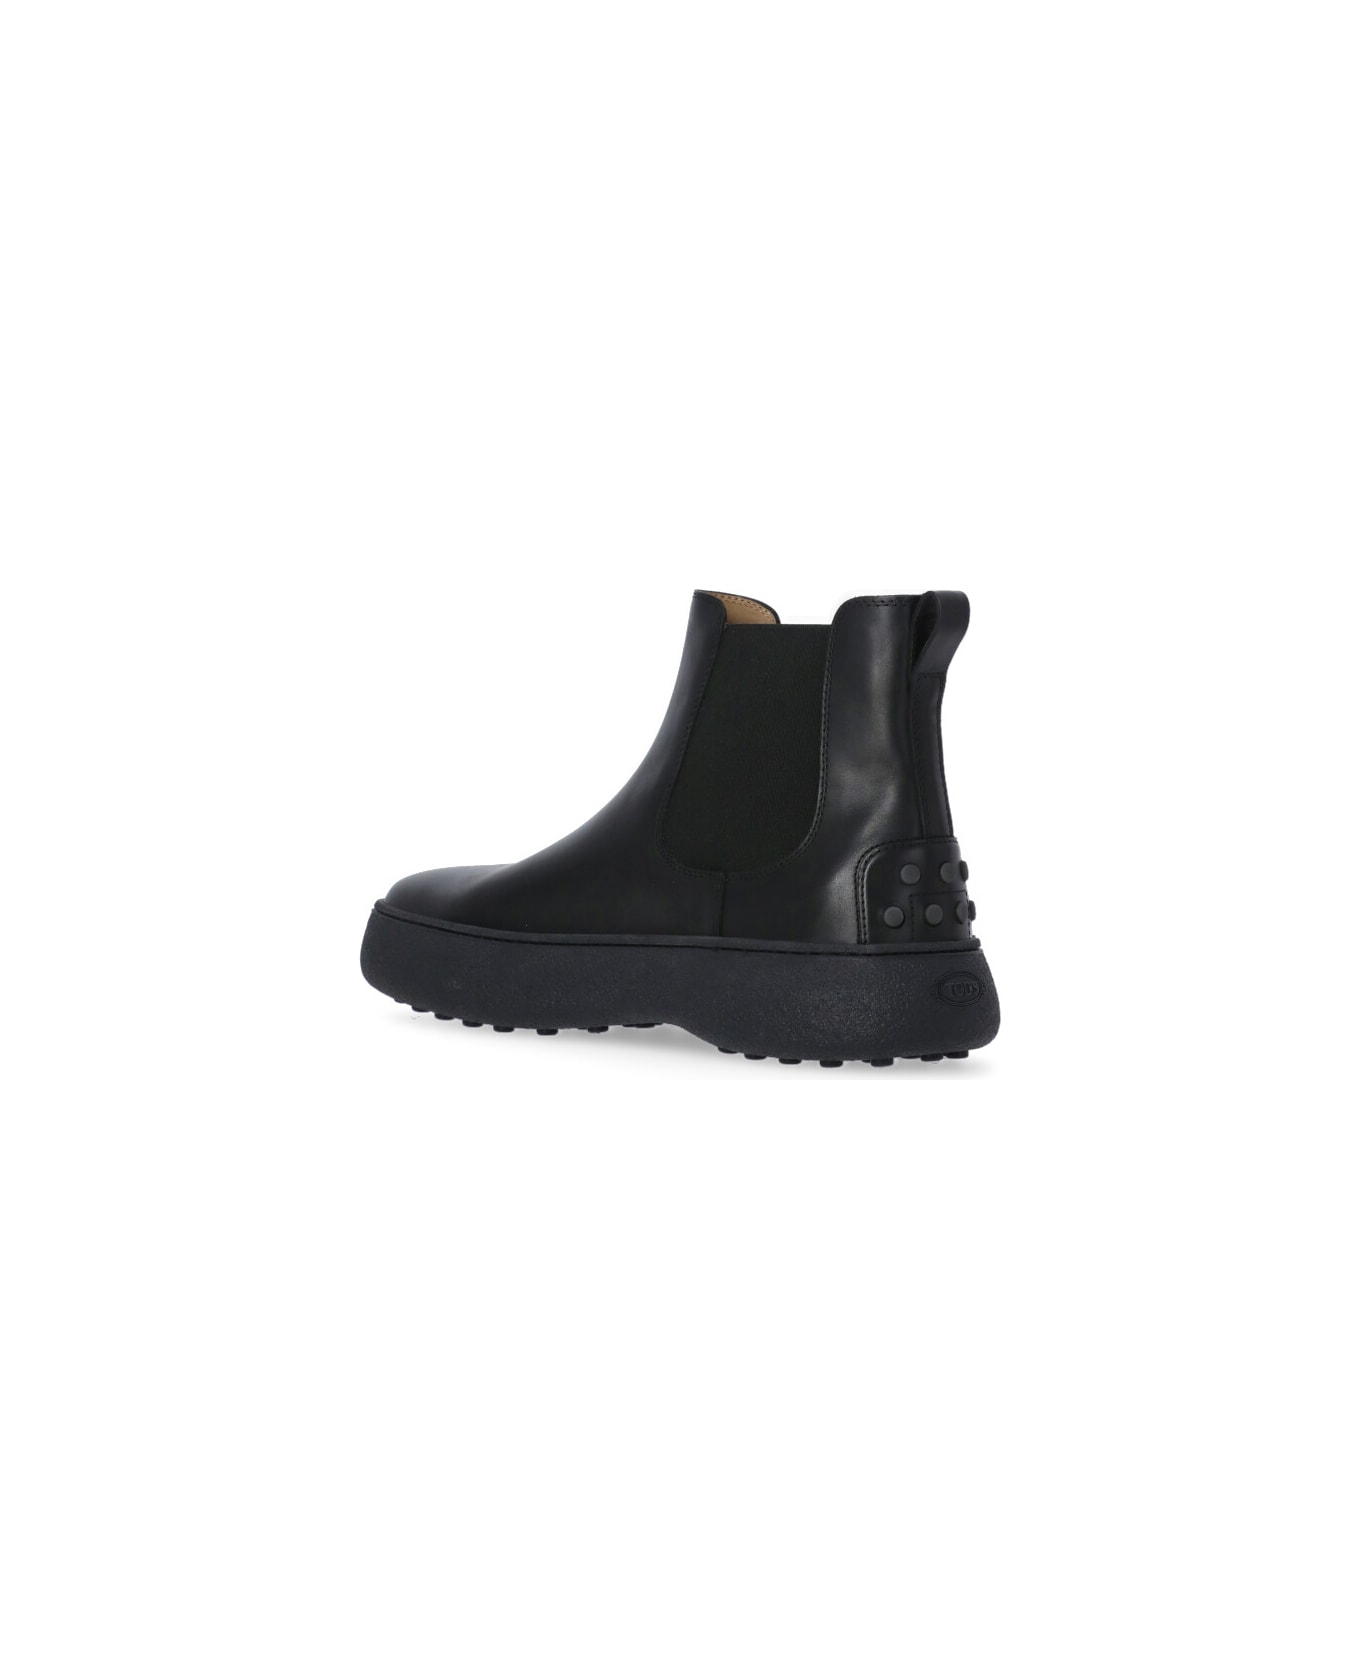 Tod's Ankle Boots - Black ブーツ